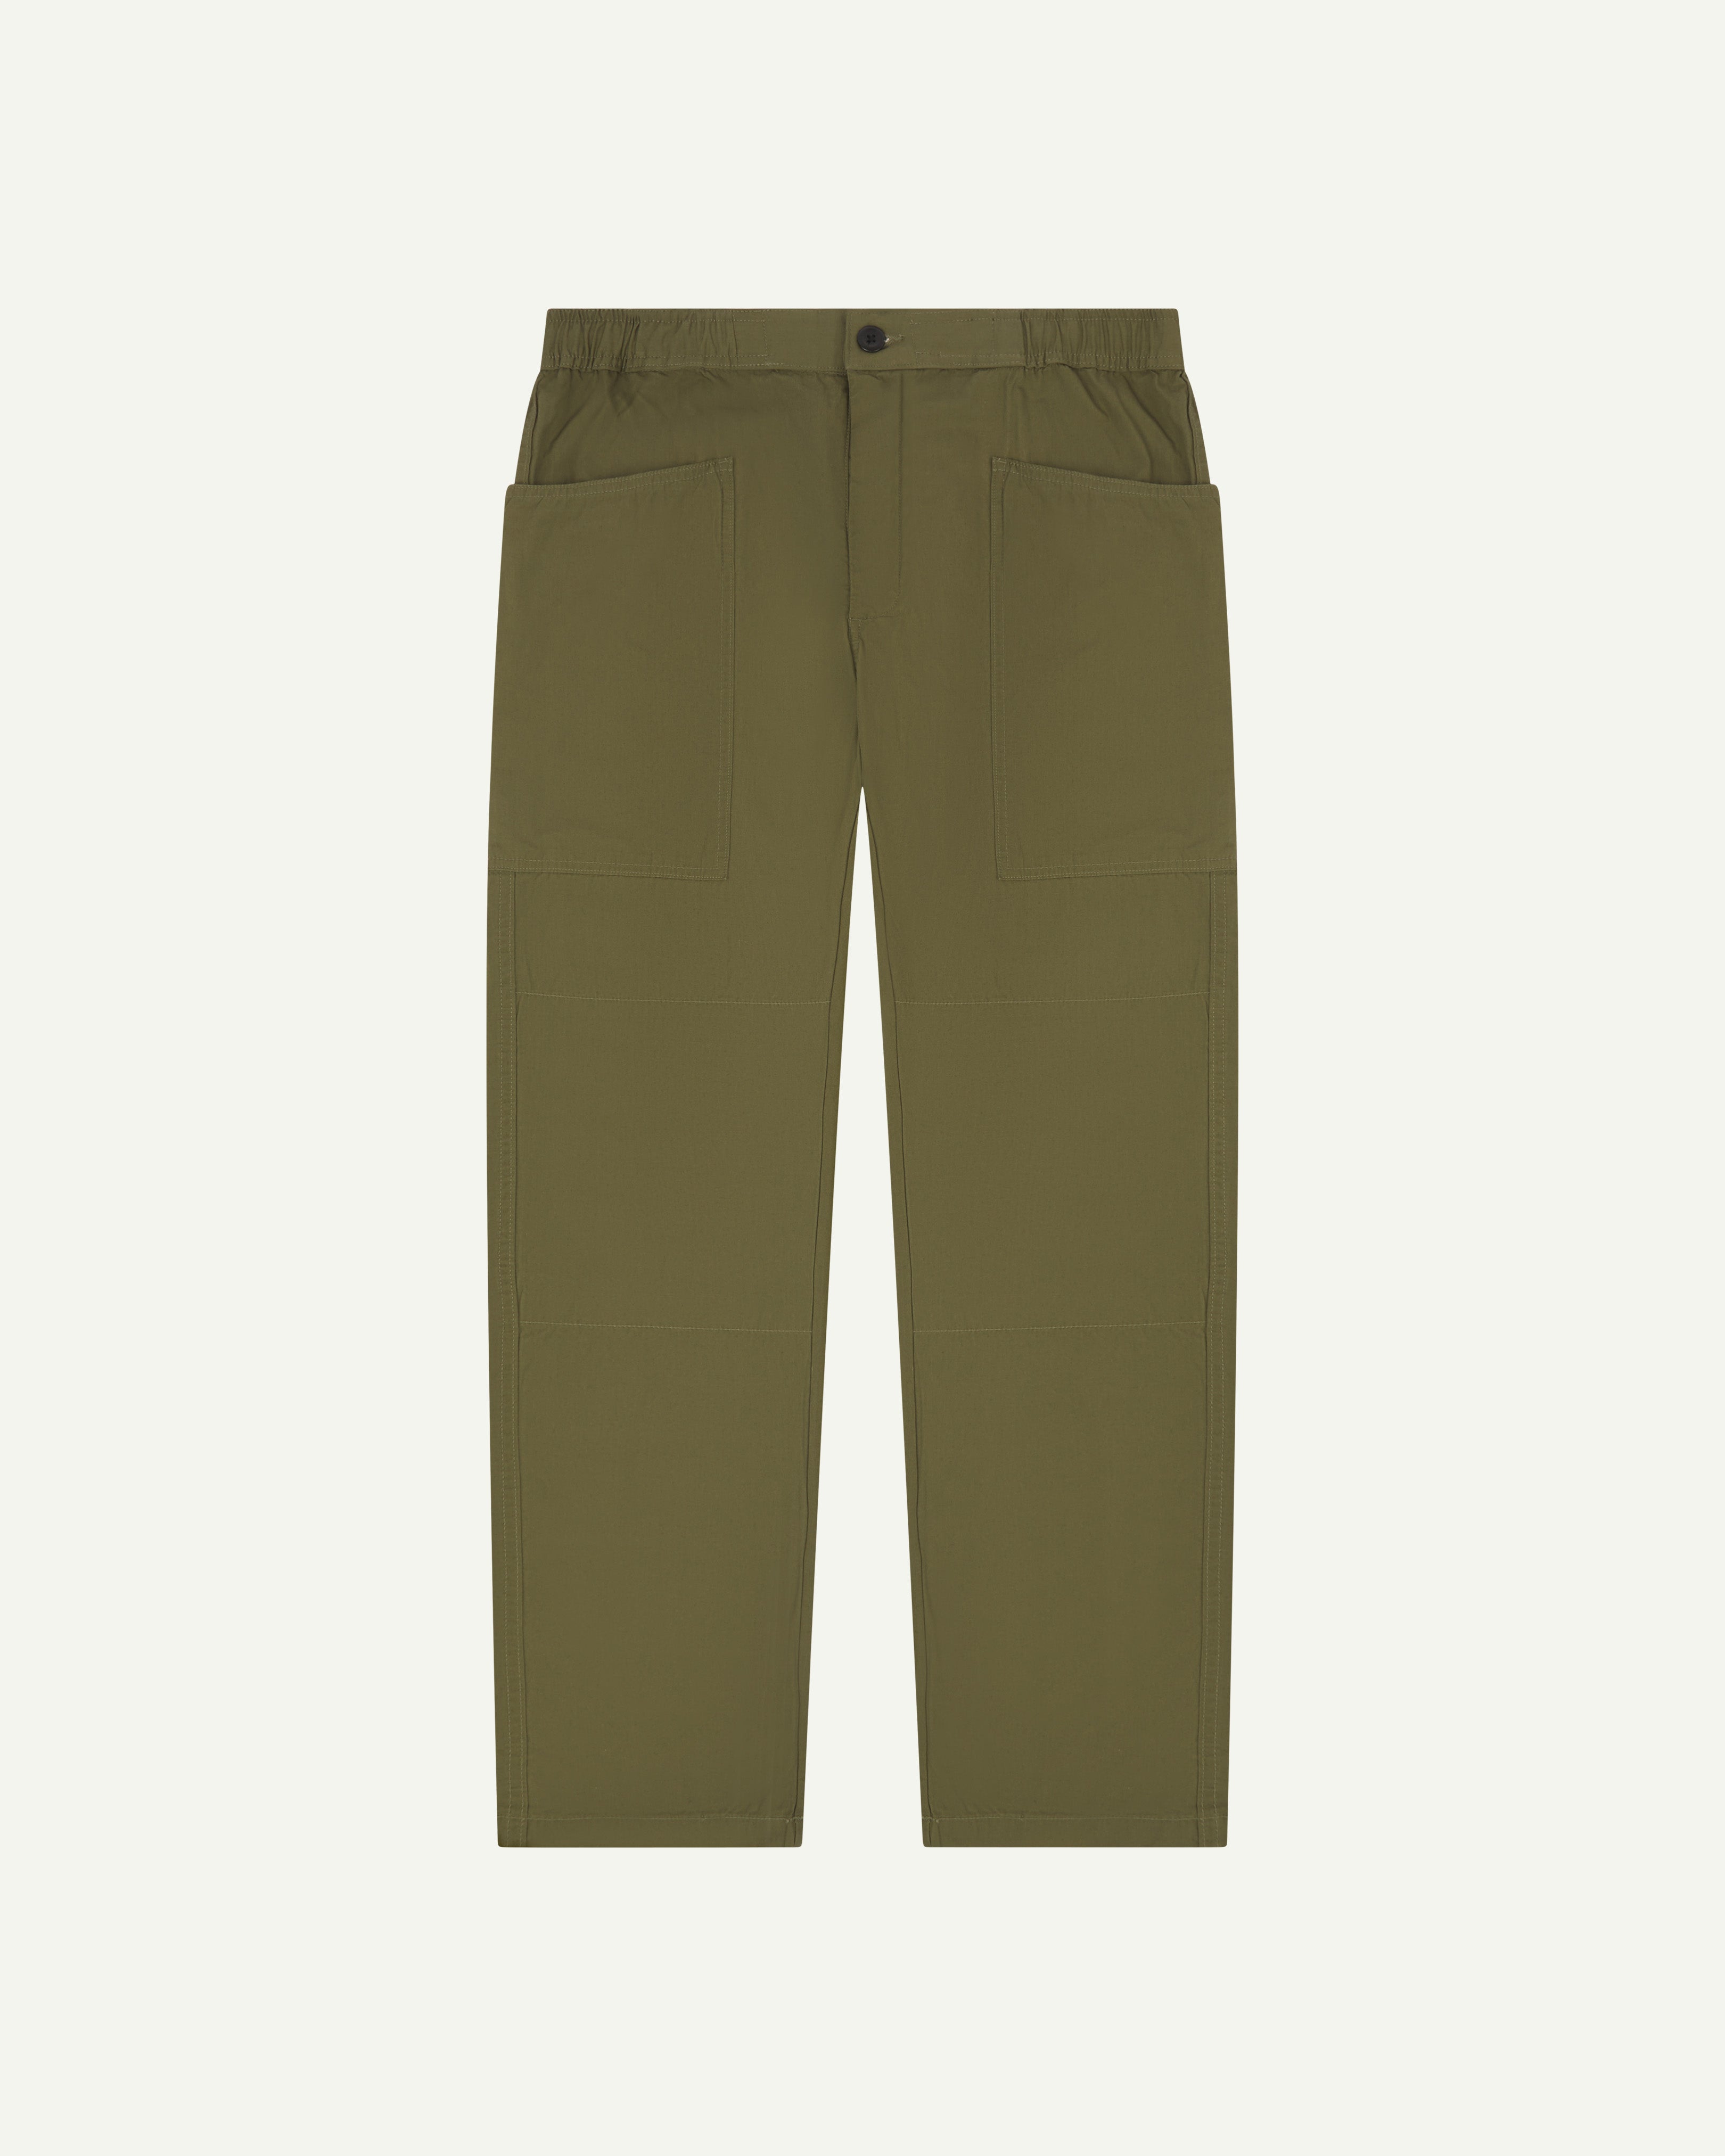 Front shot of #5011 Uskees men's organic 'olive-green' casual trousers. Clearly showing the elasticated waist and front pockets.